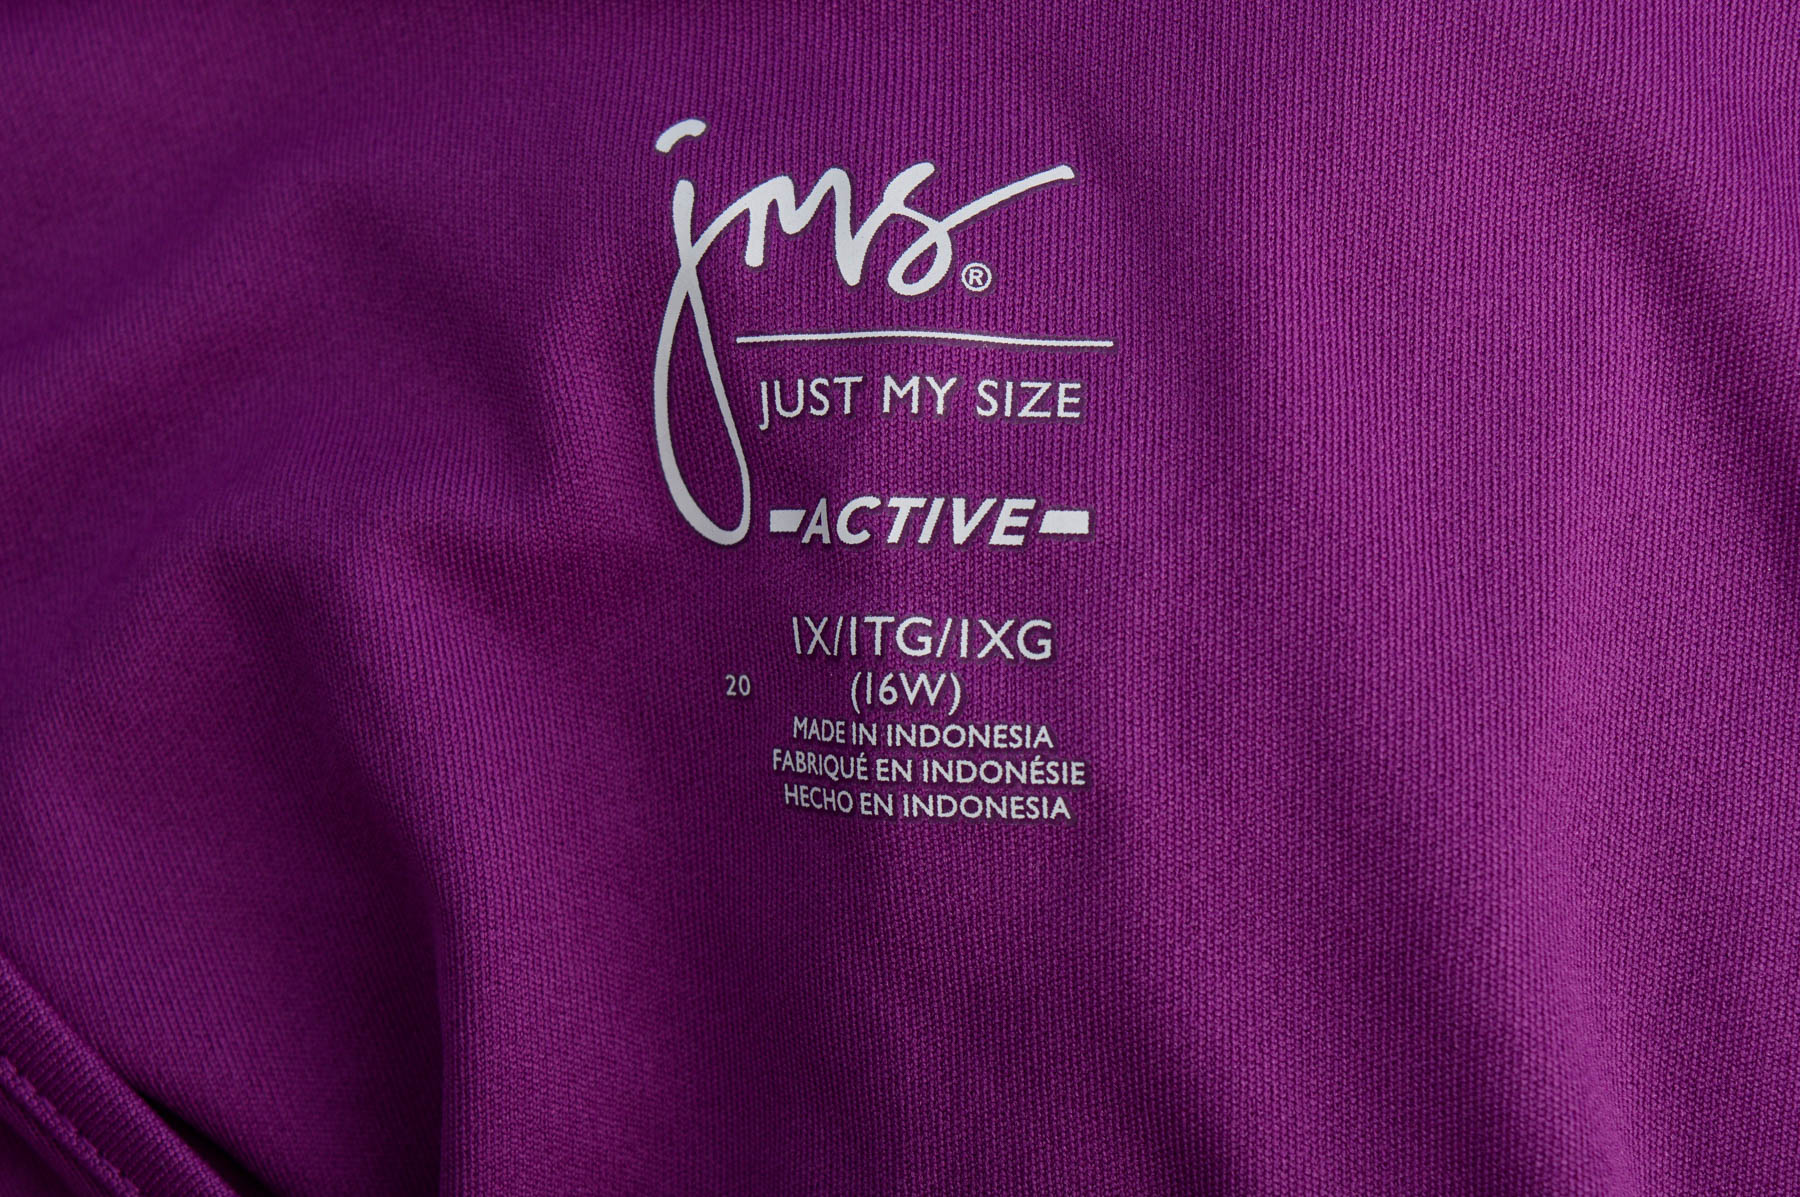 Women's top - Jms JUST MY SIZE - 2